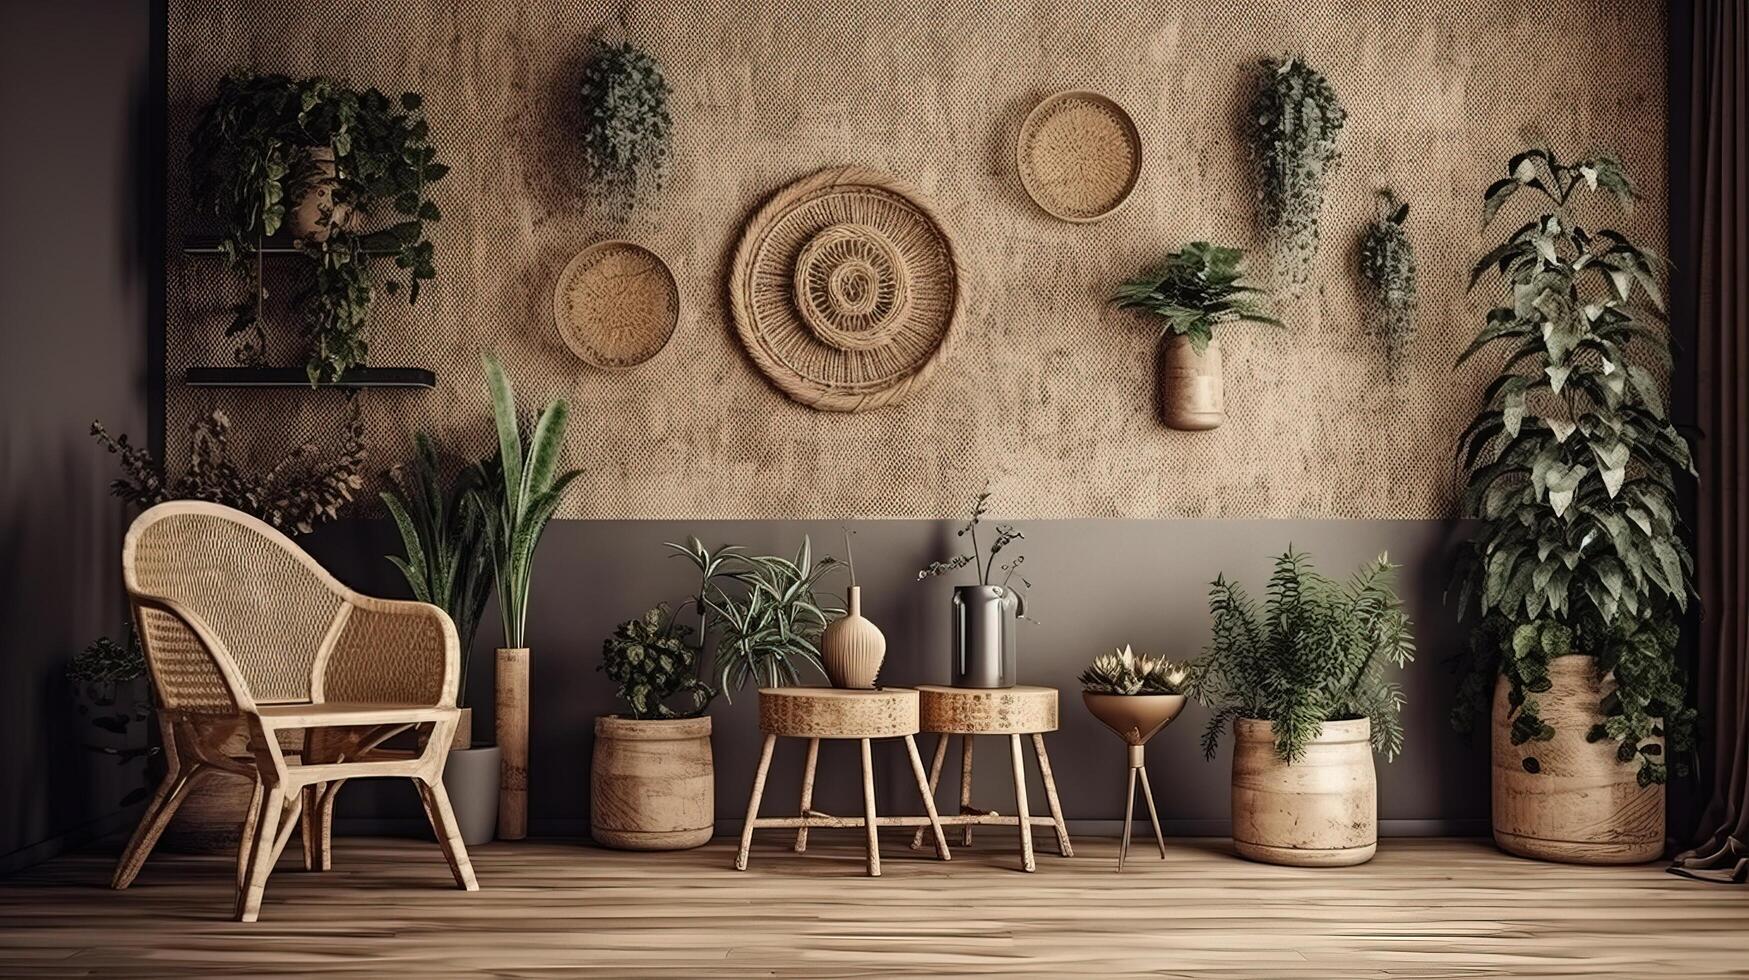 , Eco wooden room with plants with natural furniture, boho ethnic chic style interior design photo